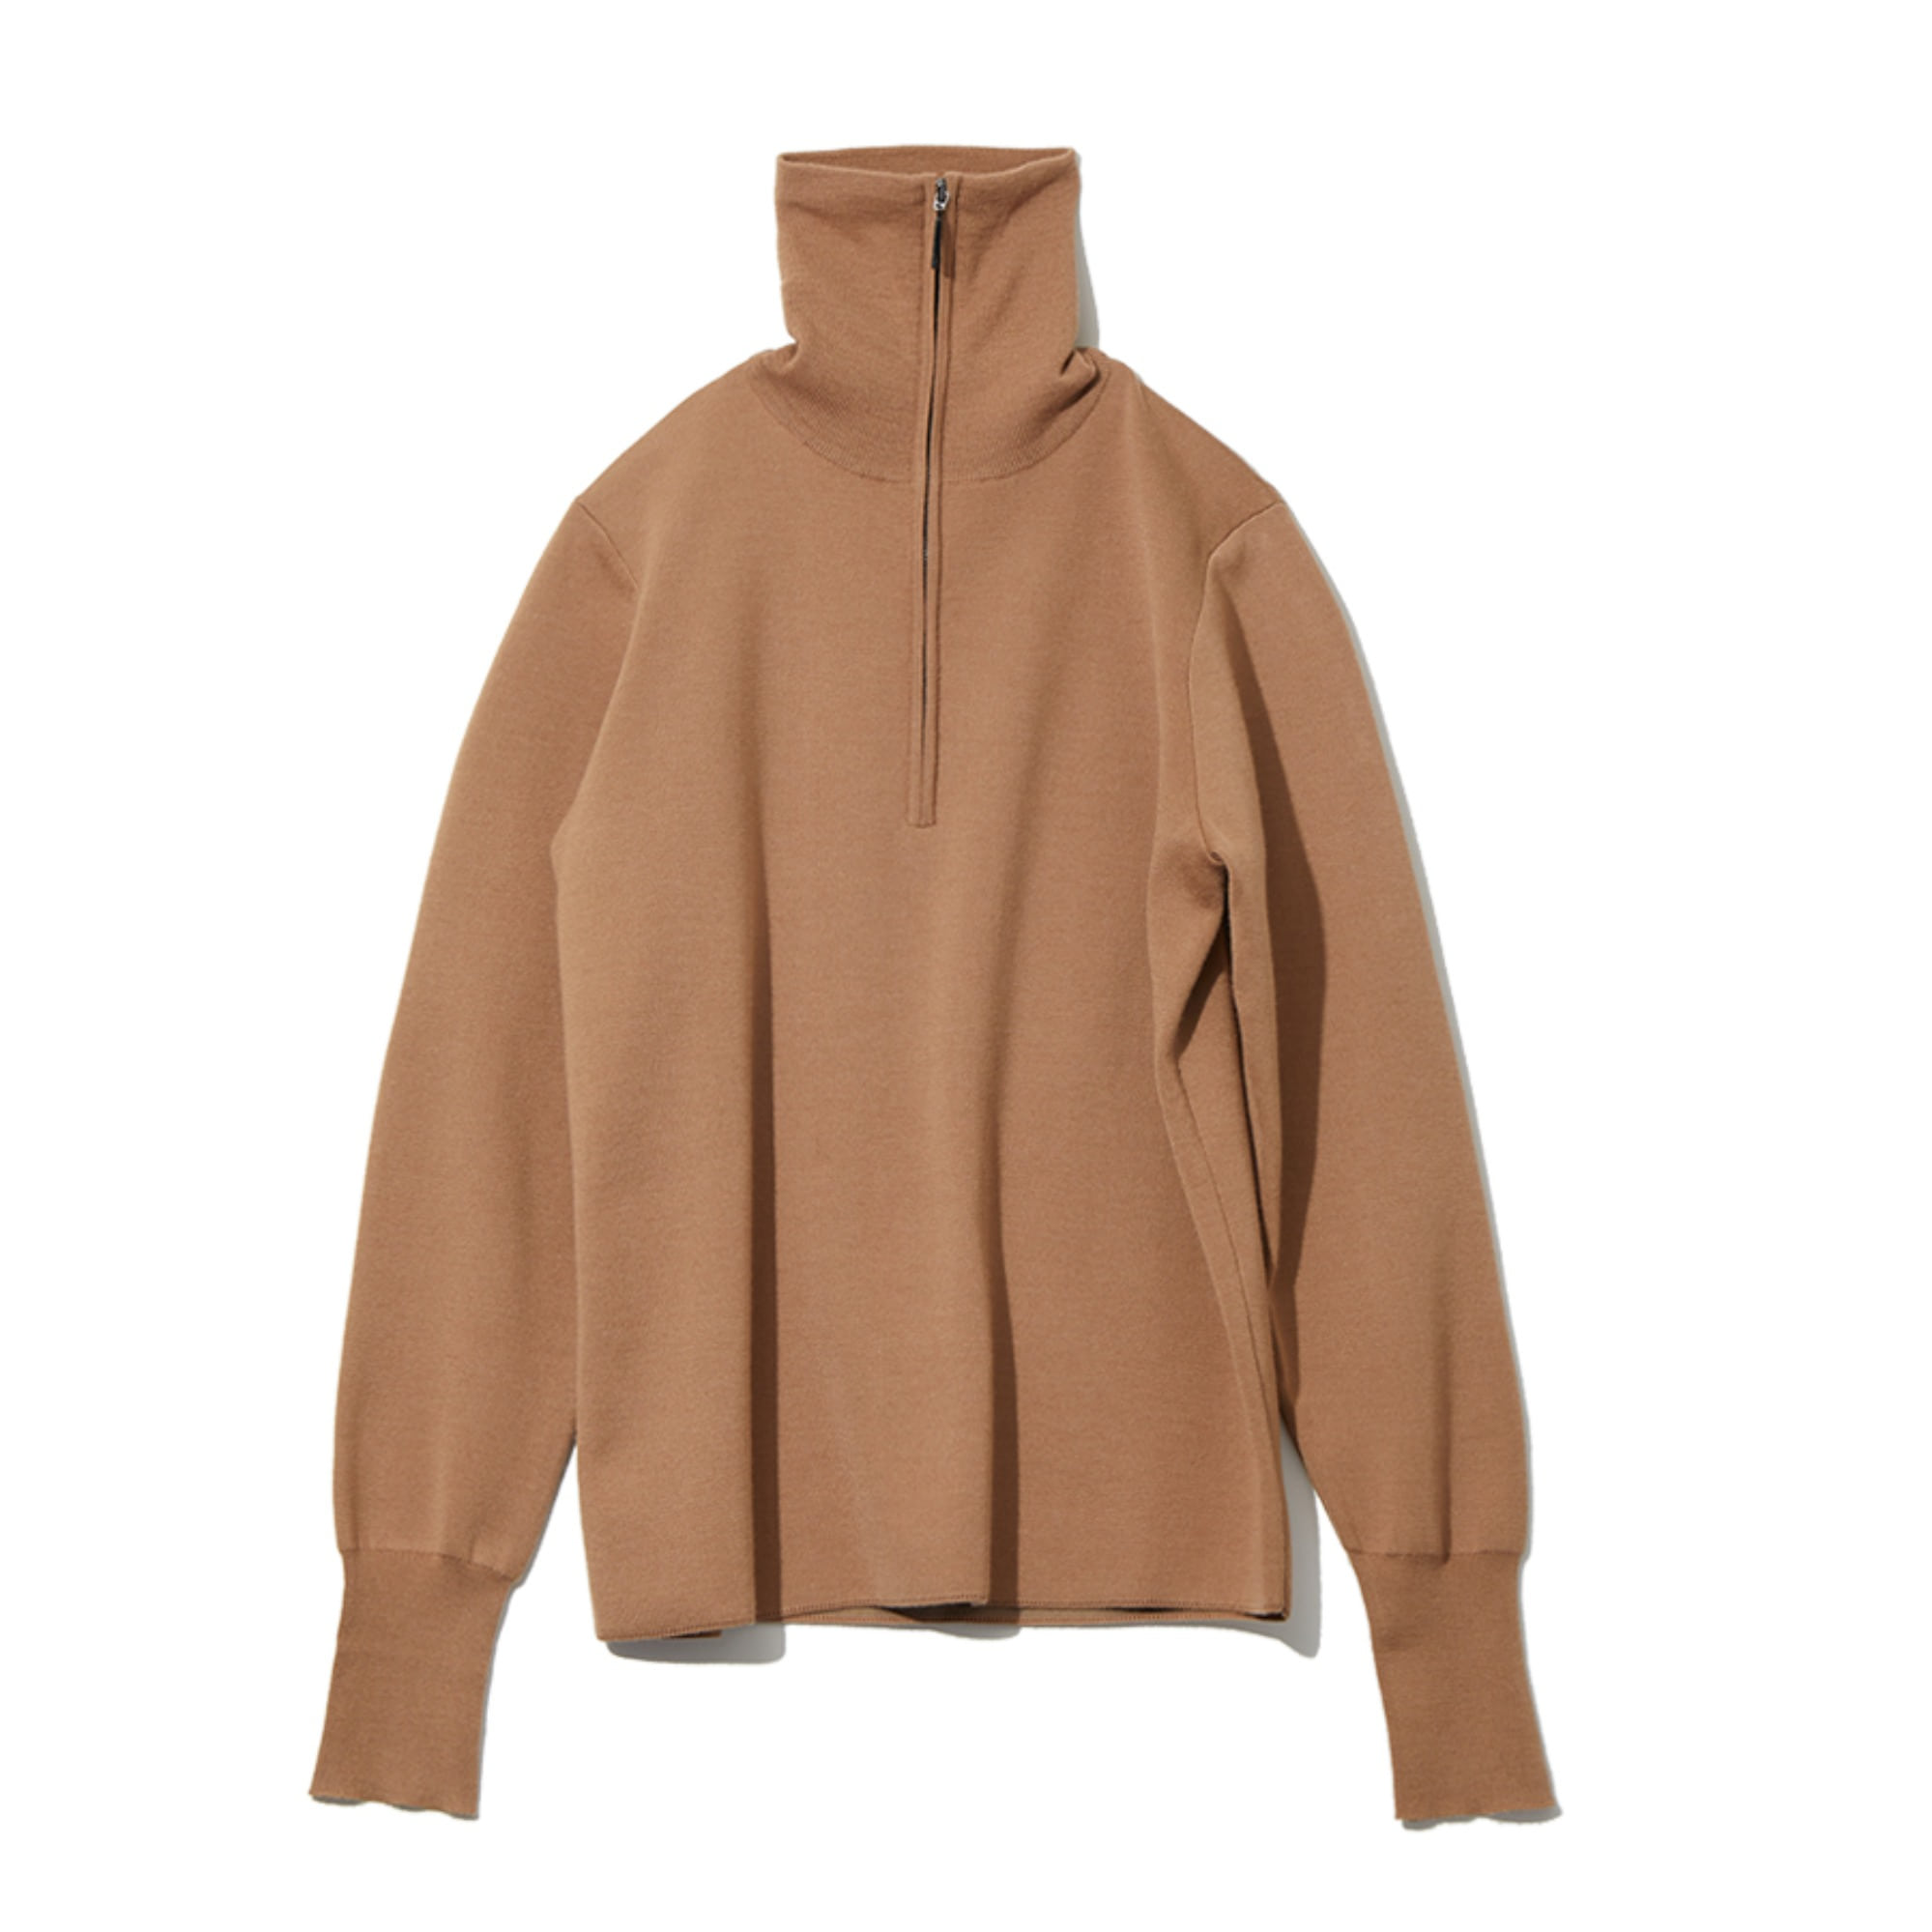 AUGUSTE ZIP UP KNIT (CAMEL)